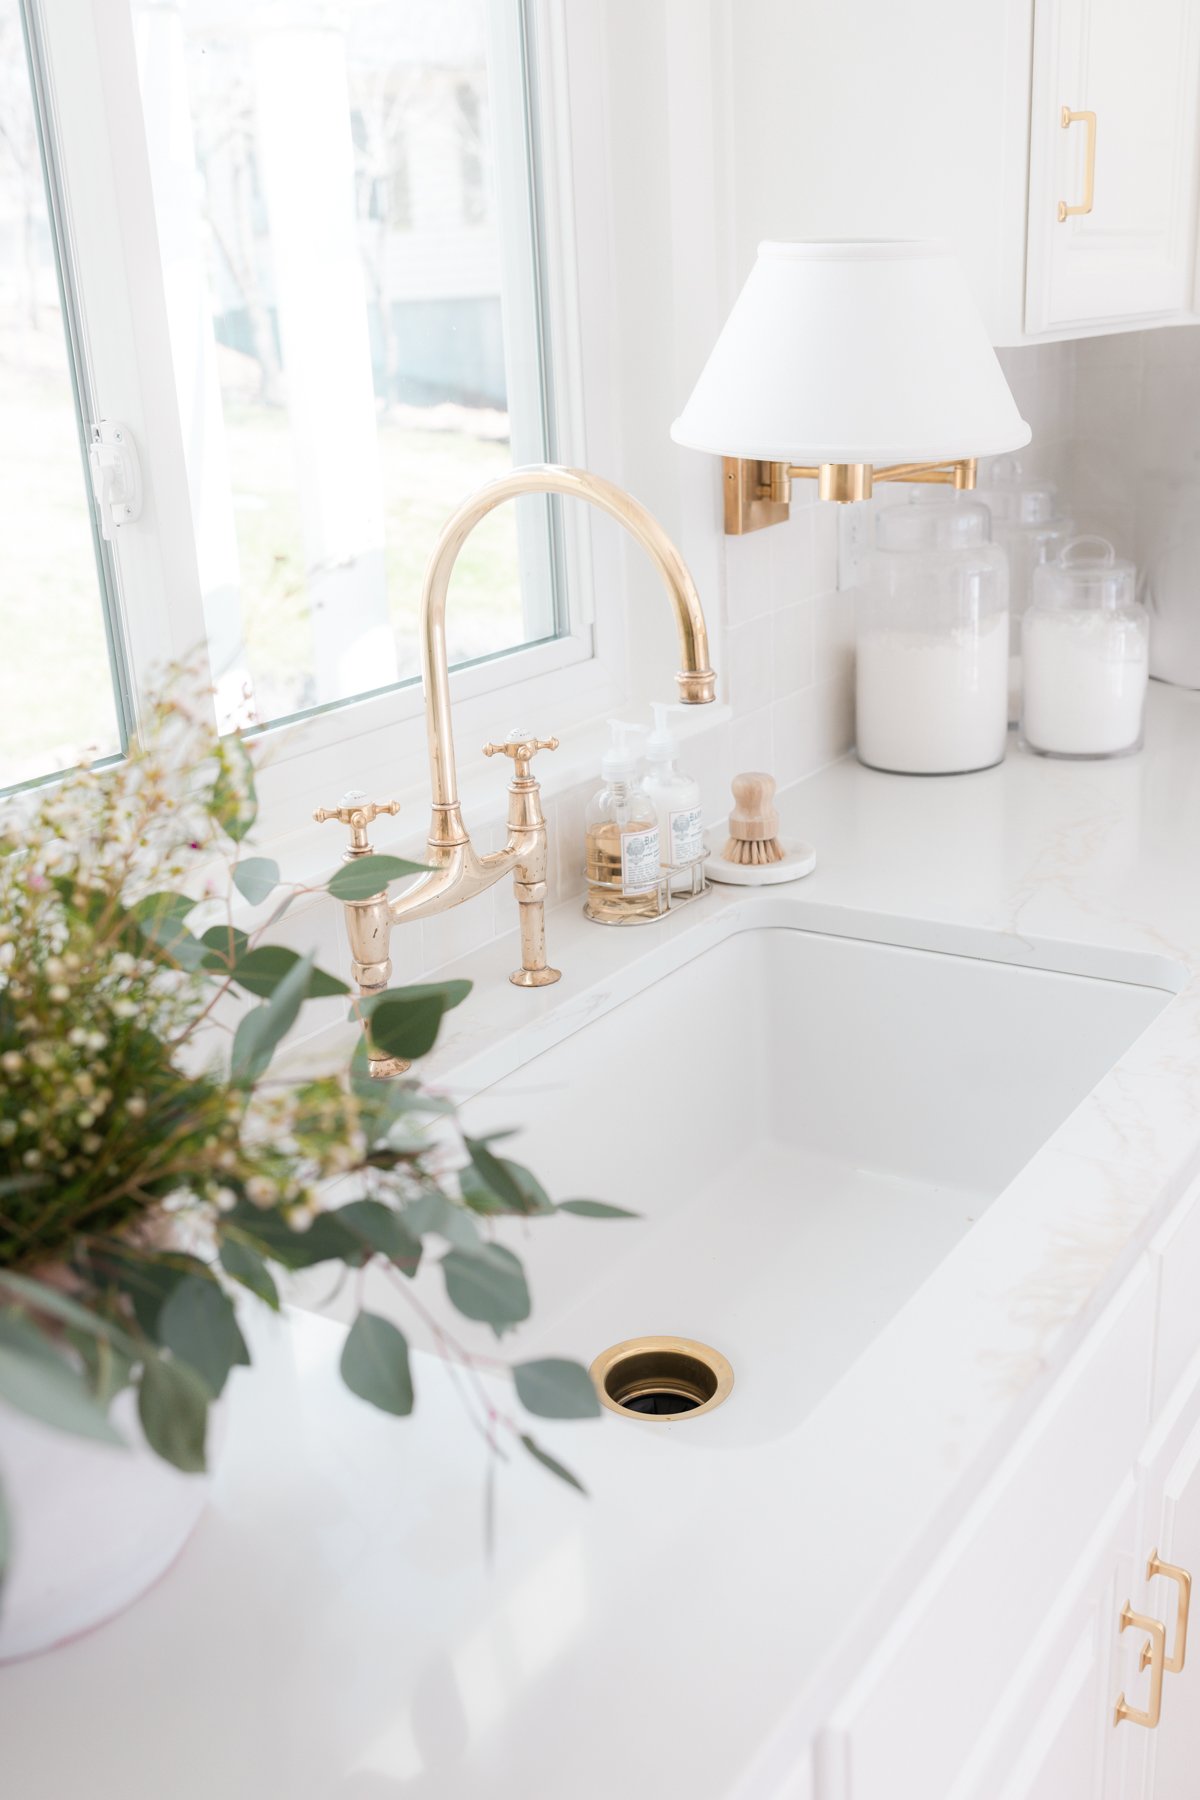 A white kitchen with a gold faucet.